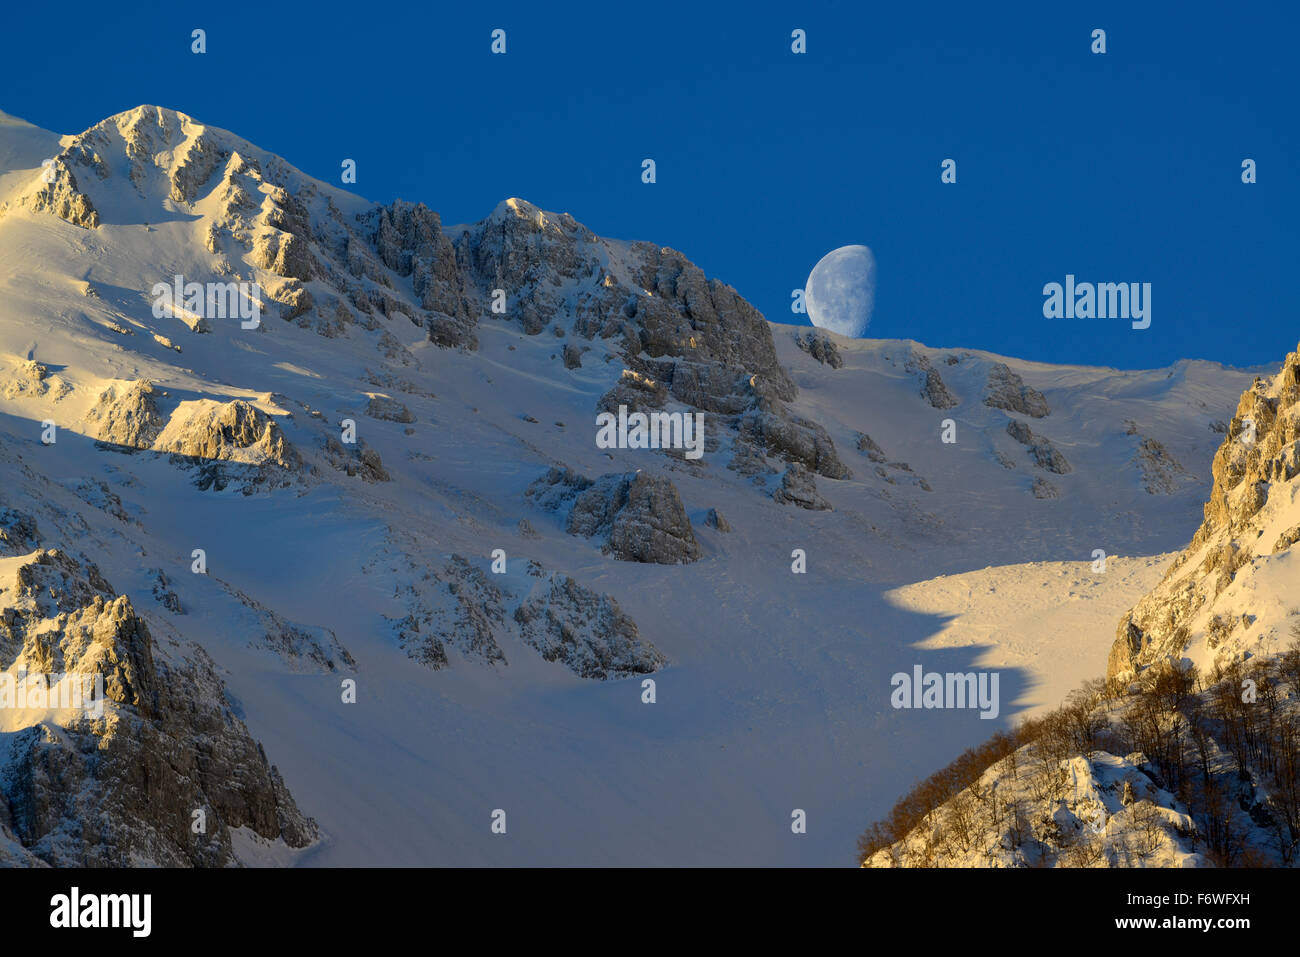 Moon standing above the snow-covered cirque at Monte Sirente, Valle Lupara, Monte Sirente, Abruzzi, Apennines, l' Aquila, Italy Stock Photo